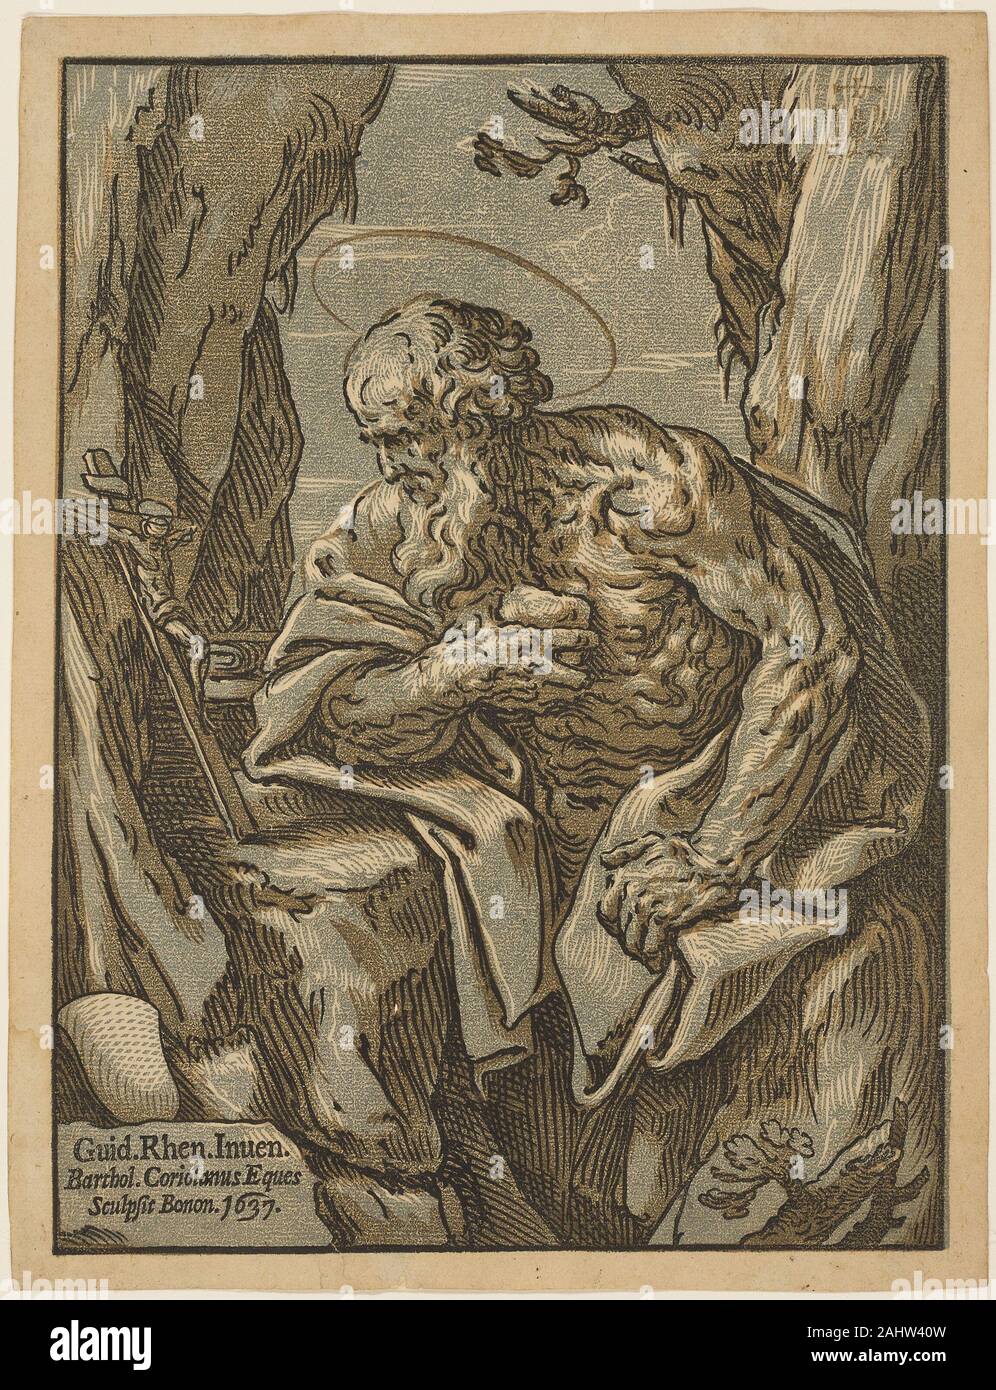 Bartolomeo Coriolano. Saint Jerome. 1637. Italy. Chiaroscuro woodcut in blue, black, and tan on buff laid paper Bartolomeo Coriolano made prints for Guido Reni in a fruitful collaboration that lasted from 1627 until Reni’s death. The more established artist approved so highly of Coriolano’s intricate chiaroscuro woodcutting skills that in the end he asked him to reproduce 24 of his drawings. The nearby etching (1935.431) by Reni himself, which is monochromatic and more realistic due to its fine lines, demonstrates the contrasts between intaglio and relief prints. Stock Photo